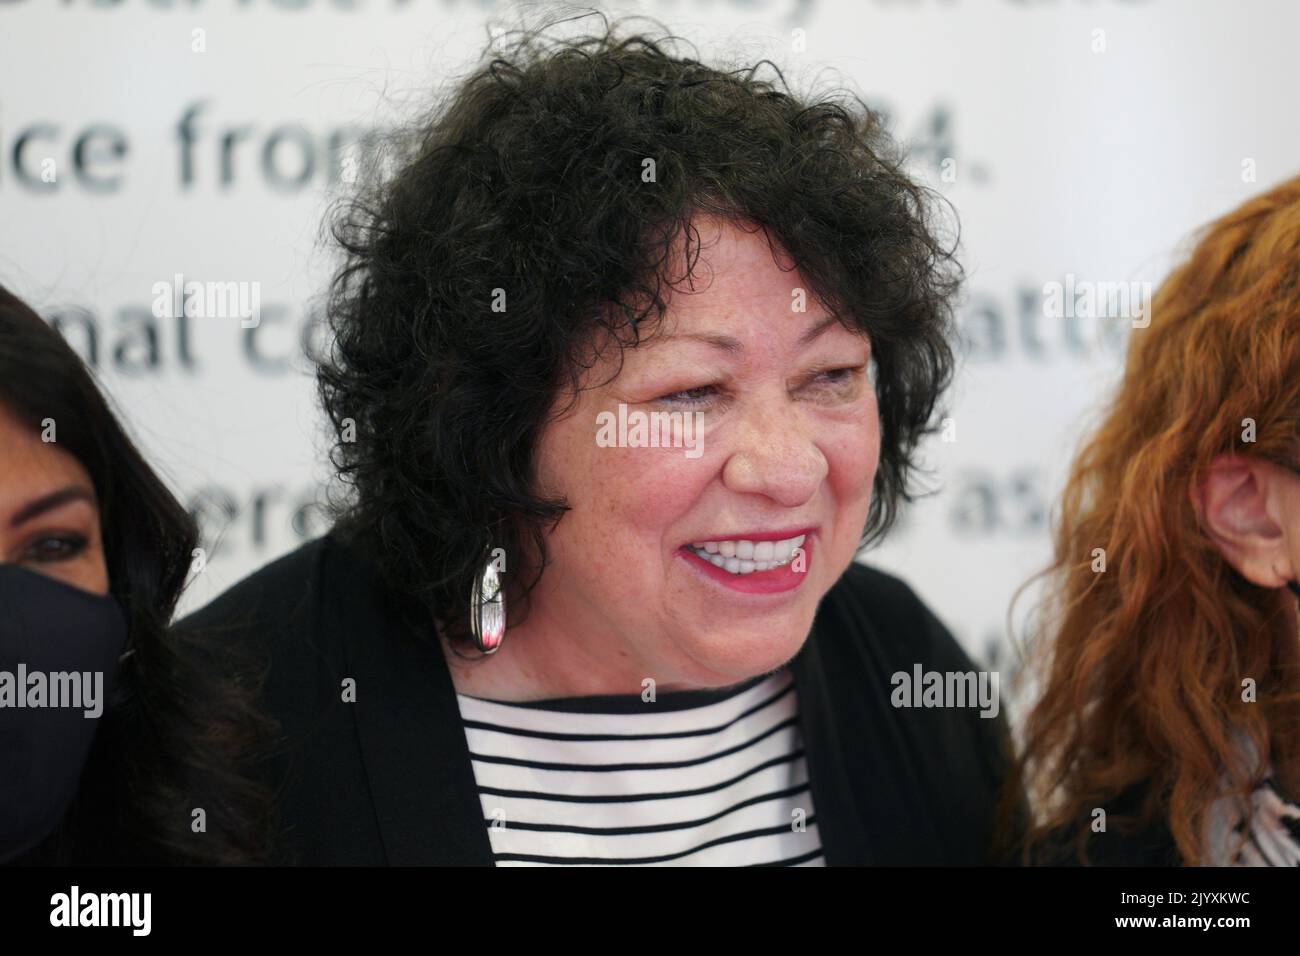 Associate Justice of the Supreme Court Sonia Sotomayor speaks with attendees after the unveiling of a sculpture of herself at the Bronx Terminal Market, Thursday, September 8, 2022, in New York, New York. Credit: Bebeto Matthews/Pool via CNP /MediaPunch Stock Photo